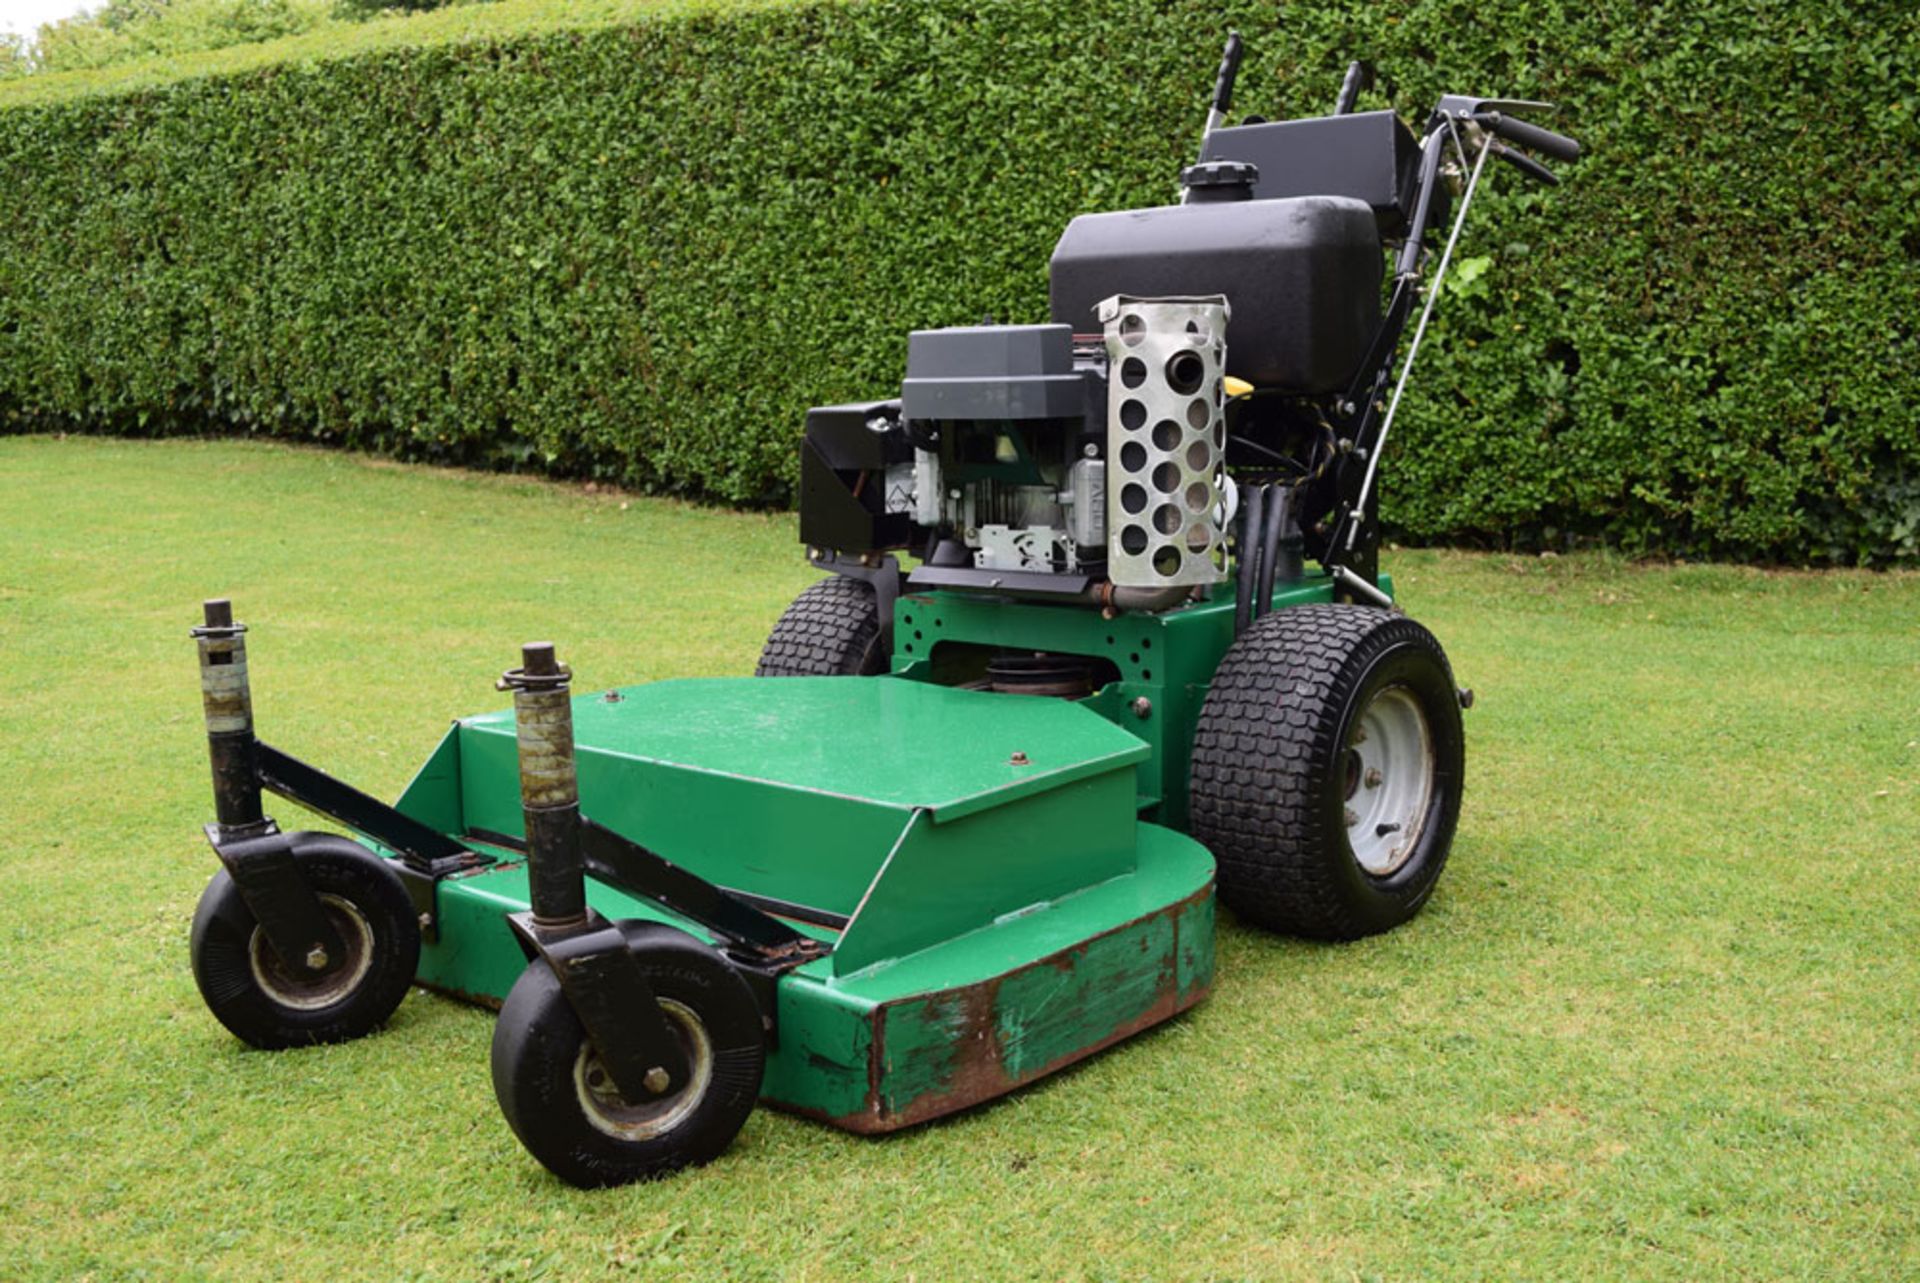 2008 Ransomes Pedestrian 36"""""""" Commercial Walk Behind Zero Turn Rotary Mower - Image 2 of 3